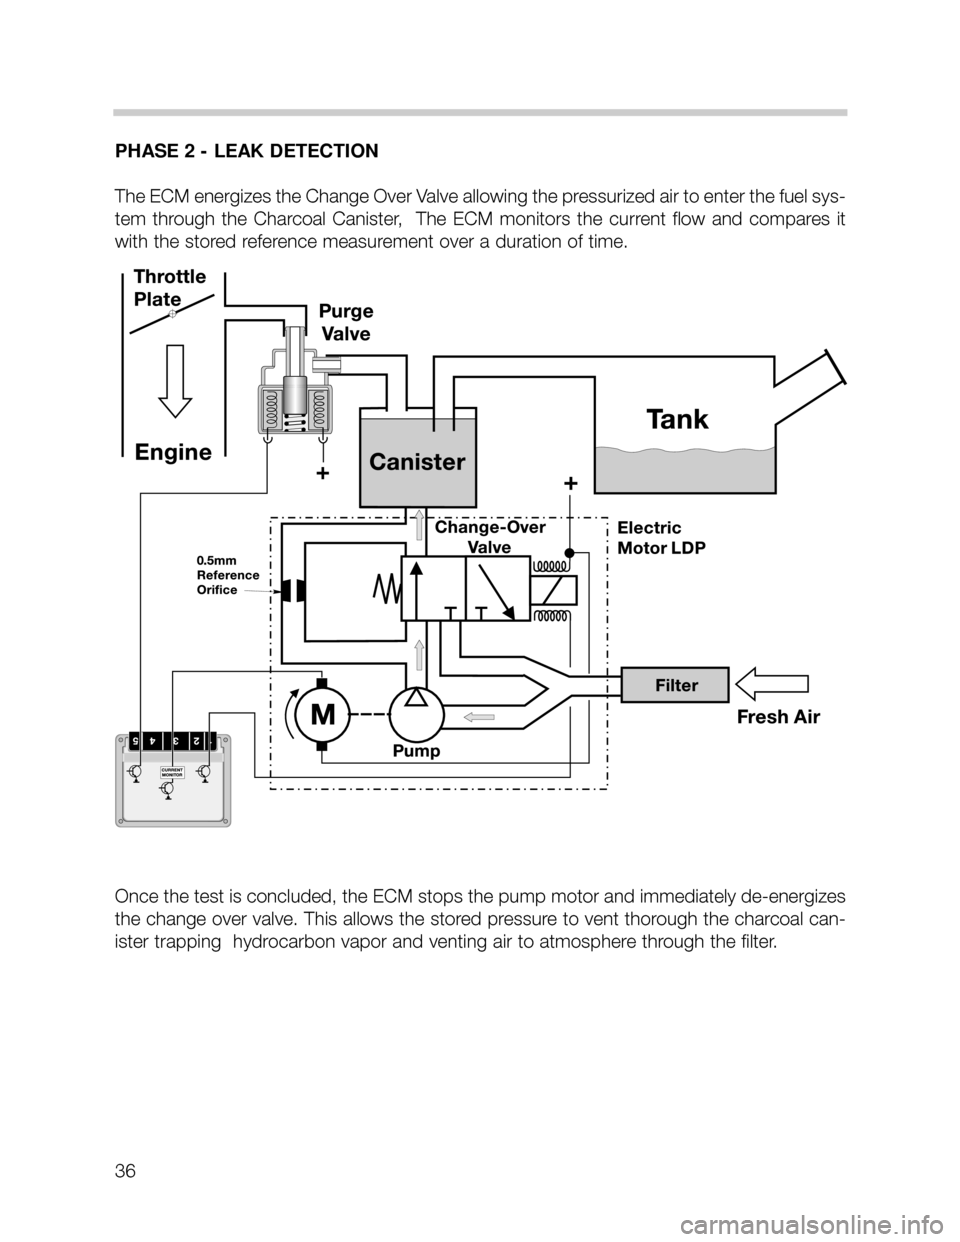 BMW X5 2003 E53 M62TU Engine Workshop Manual PHASE 2 - LEAK DETECTION
The ECM energizes the Change Over Valve allowing the pressurized air to enter the fuel sys-
tem  through  the  Charcoal  Canister,    The  ECM  monitors  the  current  flow  a